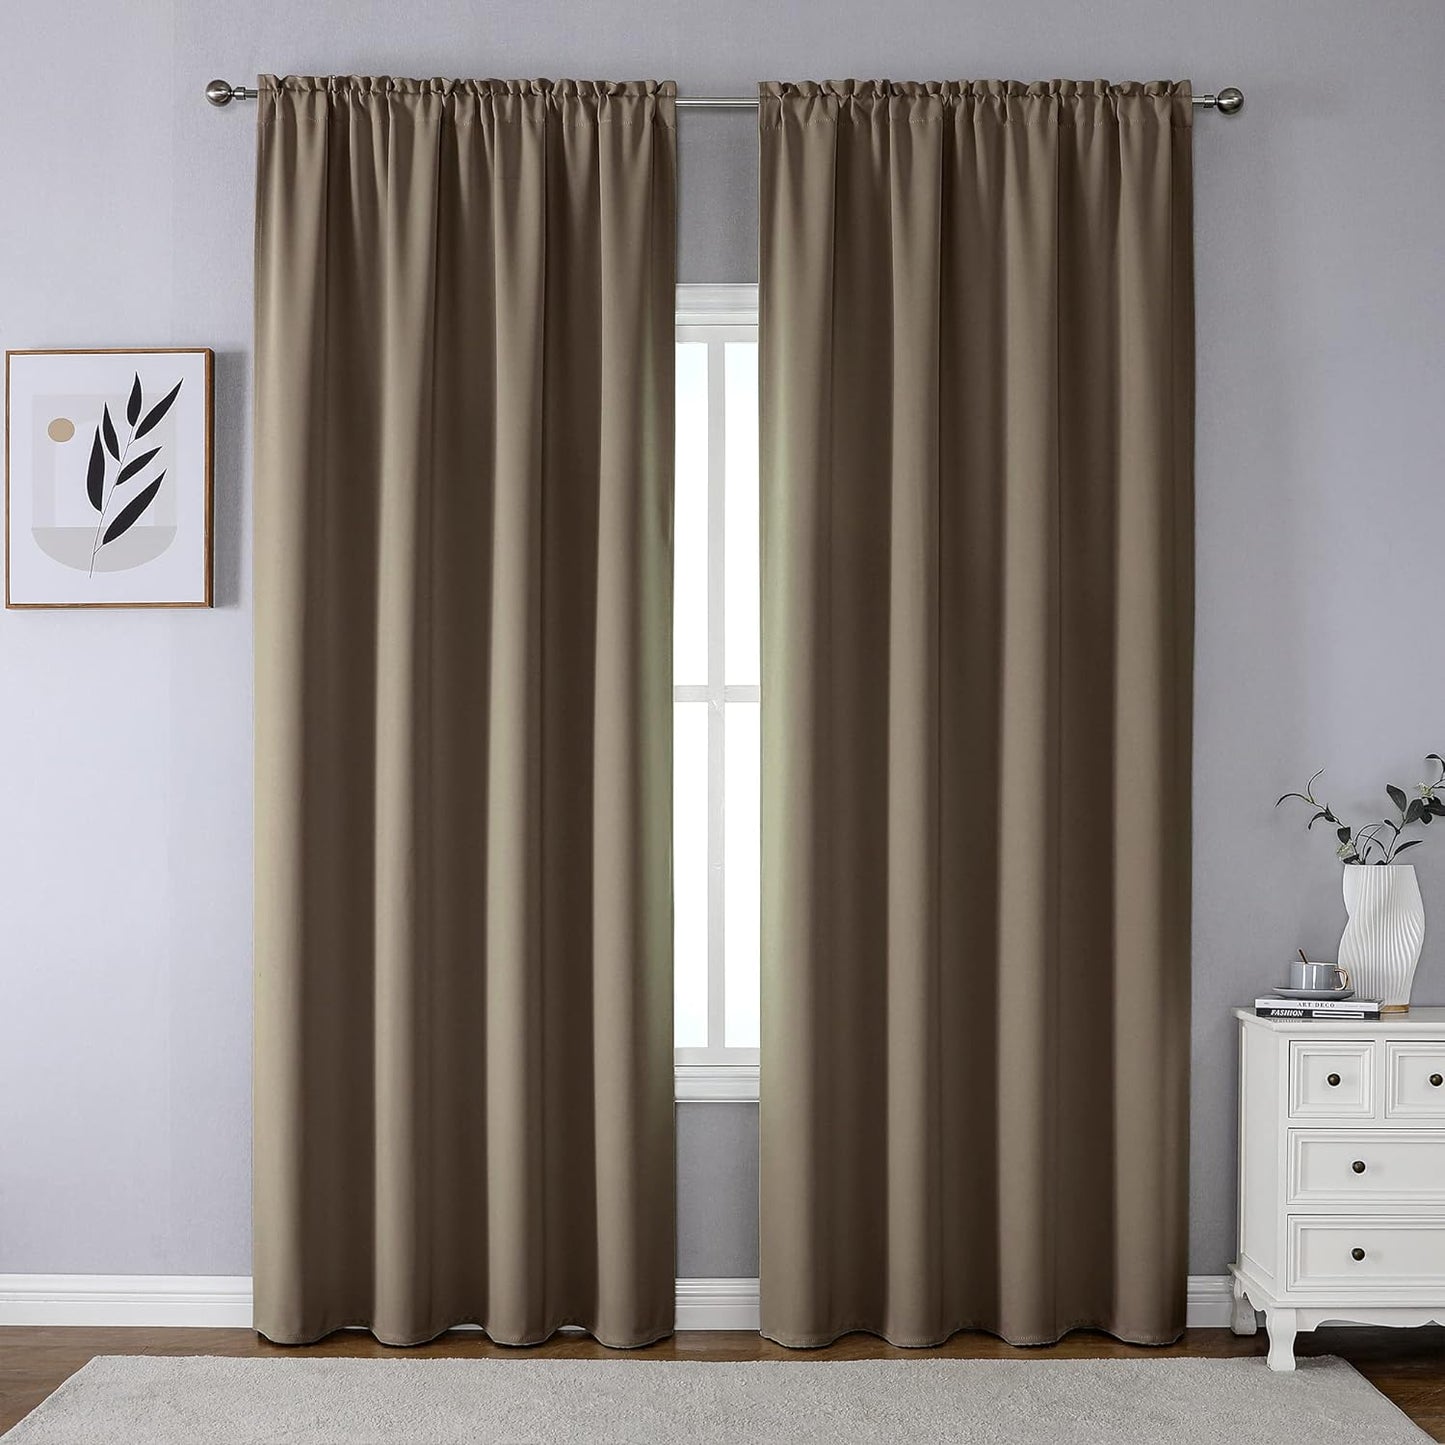 CUCRAF Blackout Curtains 84 Inches Long for Living Room, Light Beige Room Darkening Window Curtain Panels, Rod Pocket Thermal Insulated Solid Drapes for Bedroom, 52X84 Inch, Set of 2 Panels  CUCRAF Khaki 52W X 95L Inch 2 Panels 